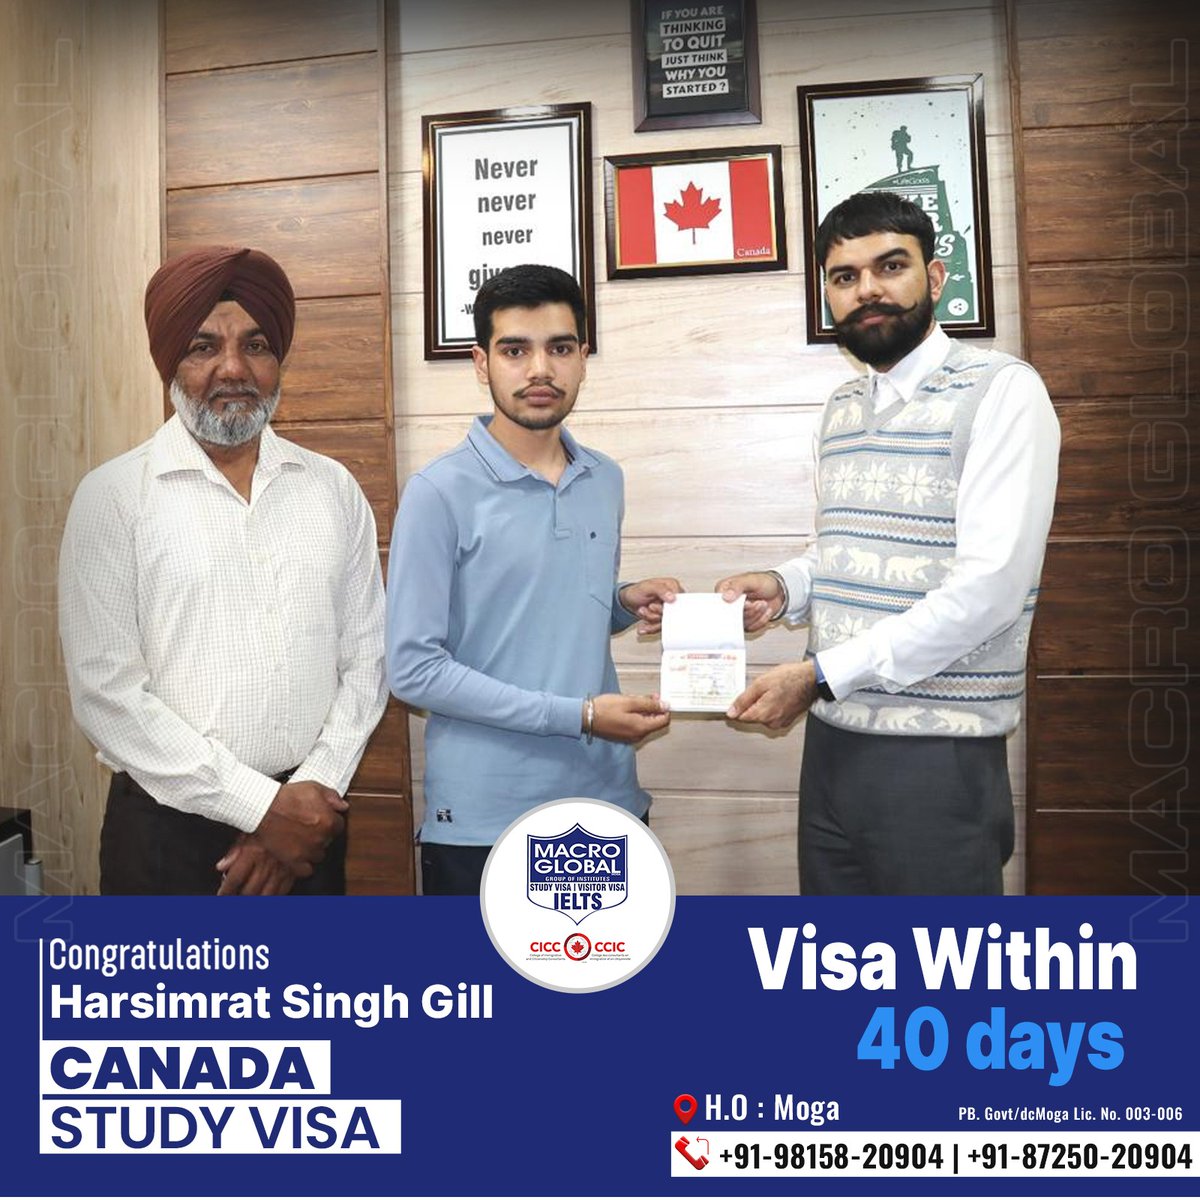 Harsimrat Singh Gill's Canada Study Visa has been approved within 40 days through our team's expert guidance! 

#MacroGlobal #GurmilapSinghDalla #Canada #Canadastudyvisa #canadaopenworkpermit #spousevisa #Visitorvisa #Visa #IELTS #EnrollNow #Immigration #immigrationlawyer #Moga